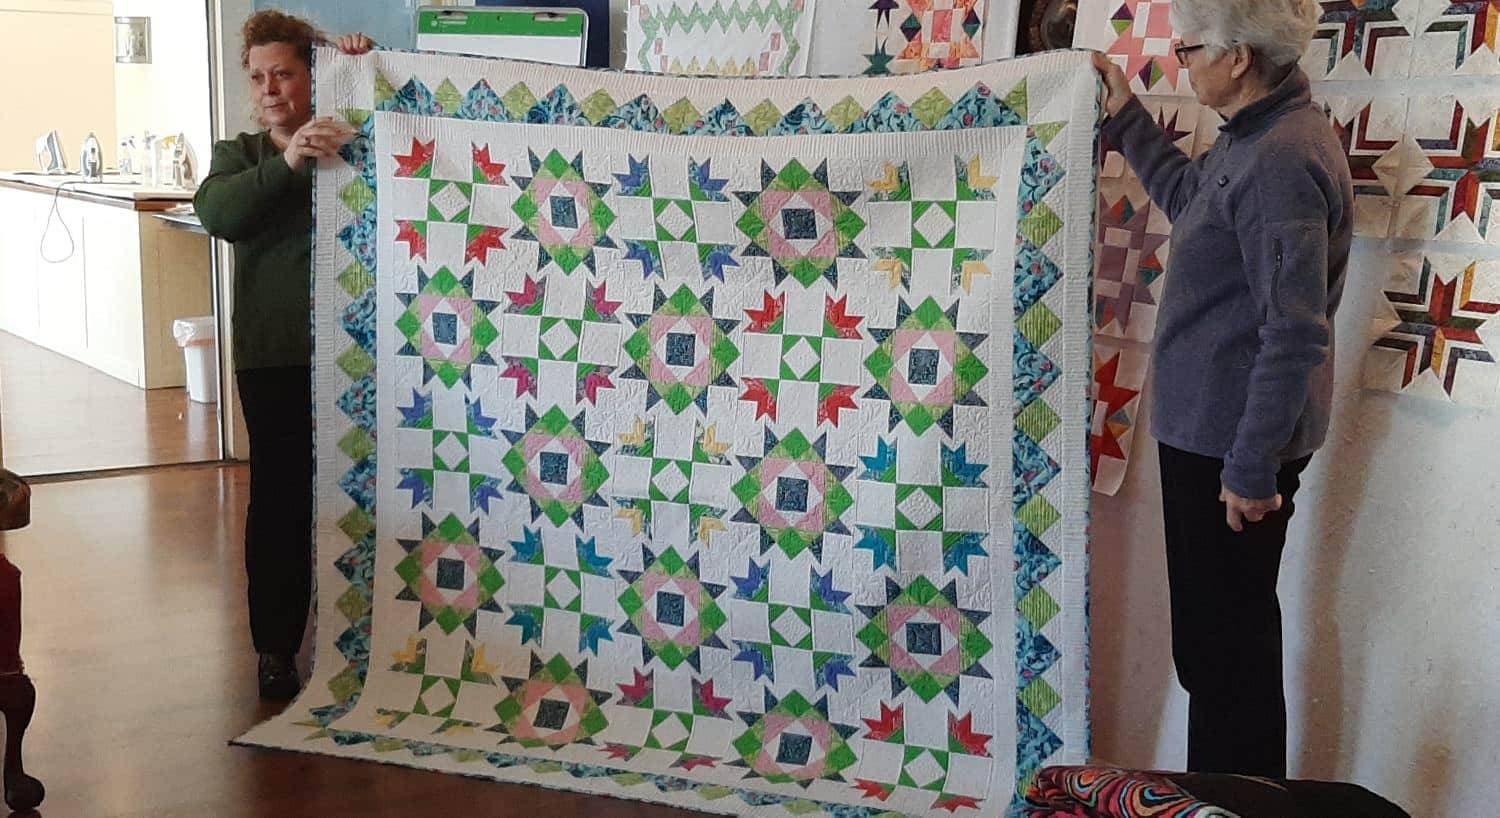 Two ladies standing and holding up a quilt with a design made up of white, green, blue, yellow, and red fabric